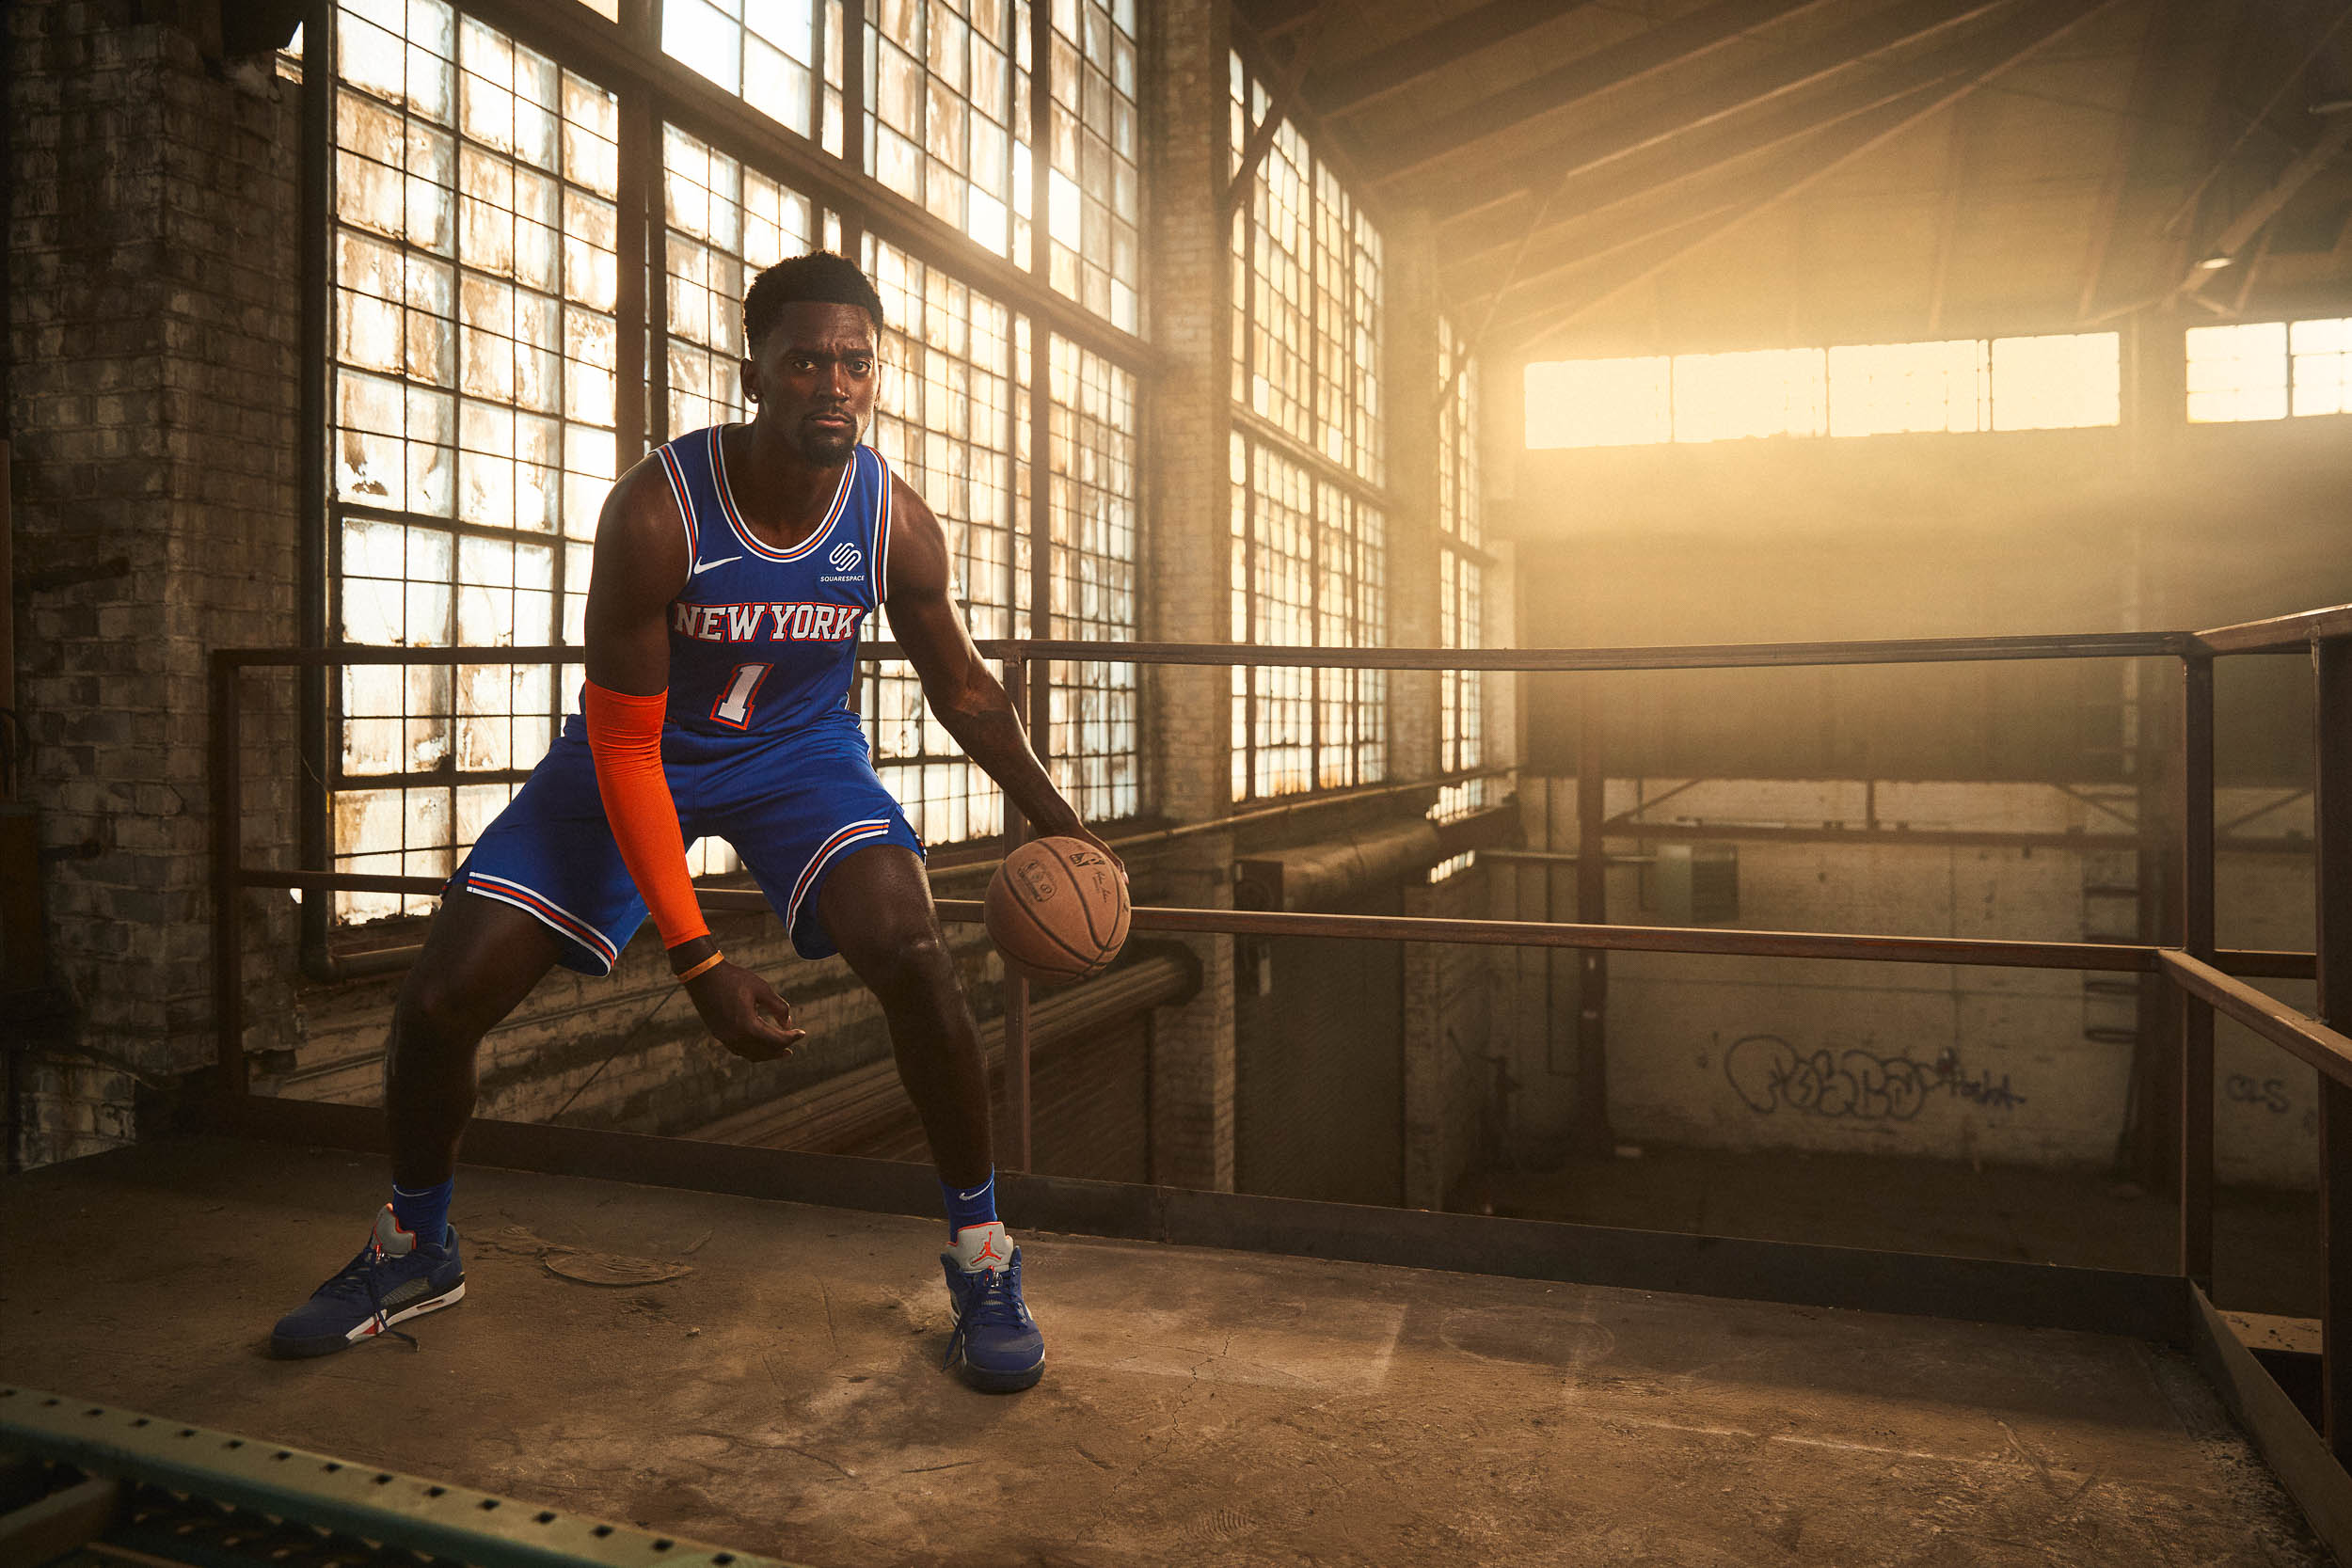 NEW YORK KNICKS BASKETBALL PHOTOGRAPHER NBA STATEMENT EDITION UNIFORM LAUNCH FASHION EDITORIAL PHOTOGRAPHY FOR SPORTS ADVERTISING IN NEW YORK CITY